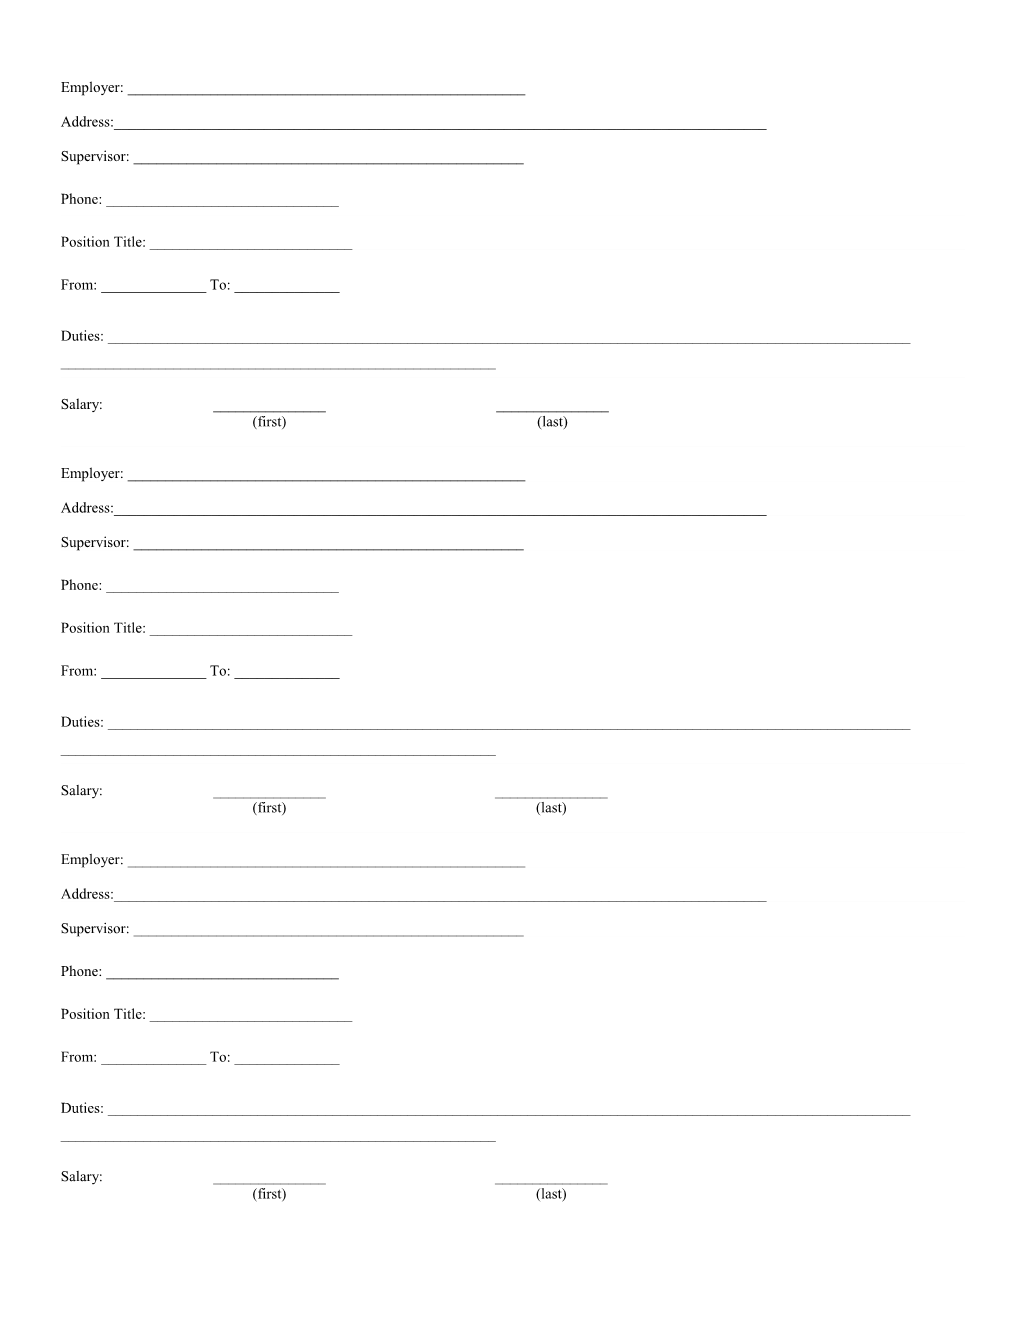 This Form Includes Almost Everything You Might Find on a Company Application